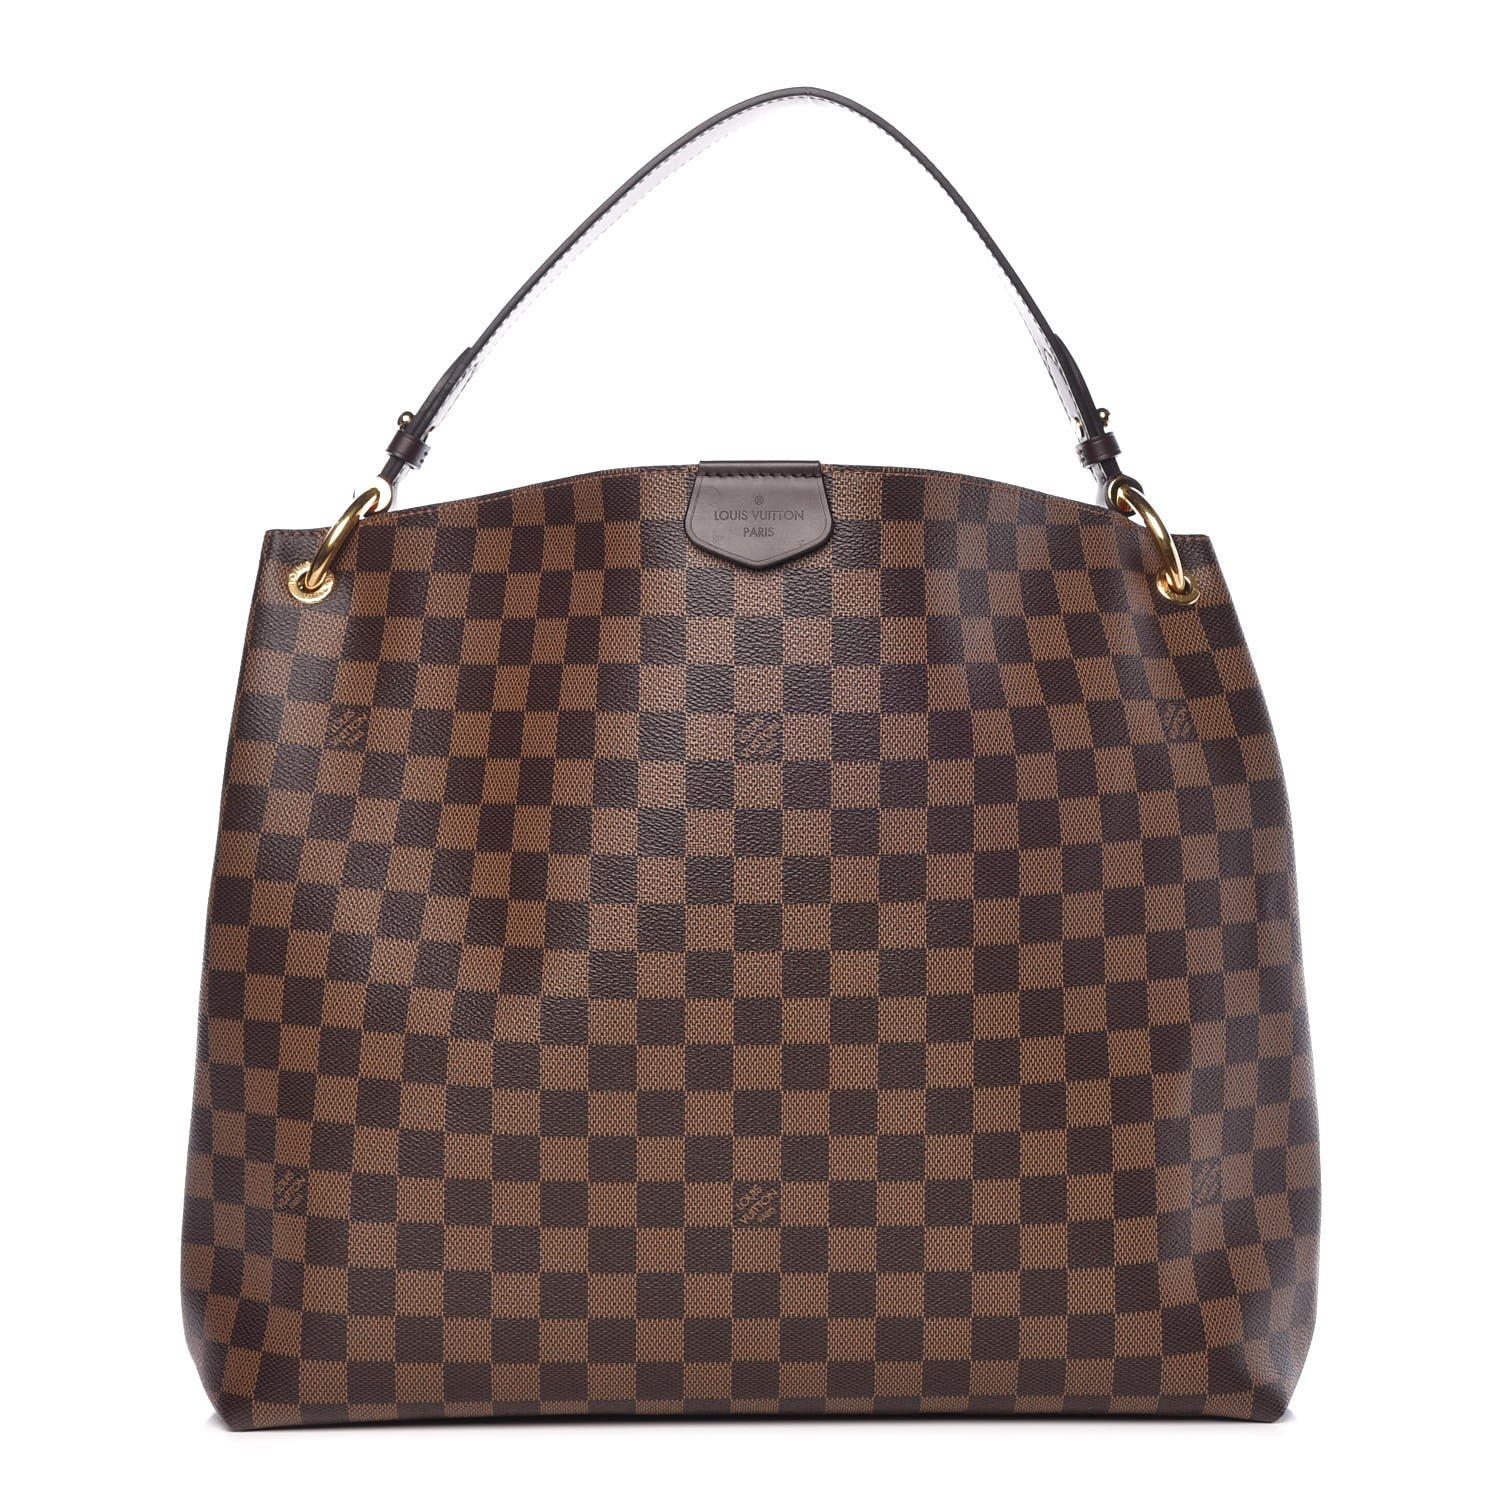 EVERYTHING YOU NEED TO KNOW ABOUT THE LOUIS VUITTON GRACEFUL MM! LOUIS  VUITTON NEVERFULL VS GRACEFUL 